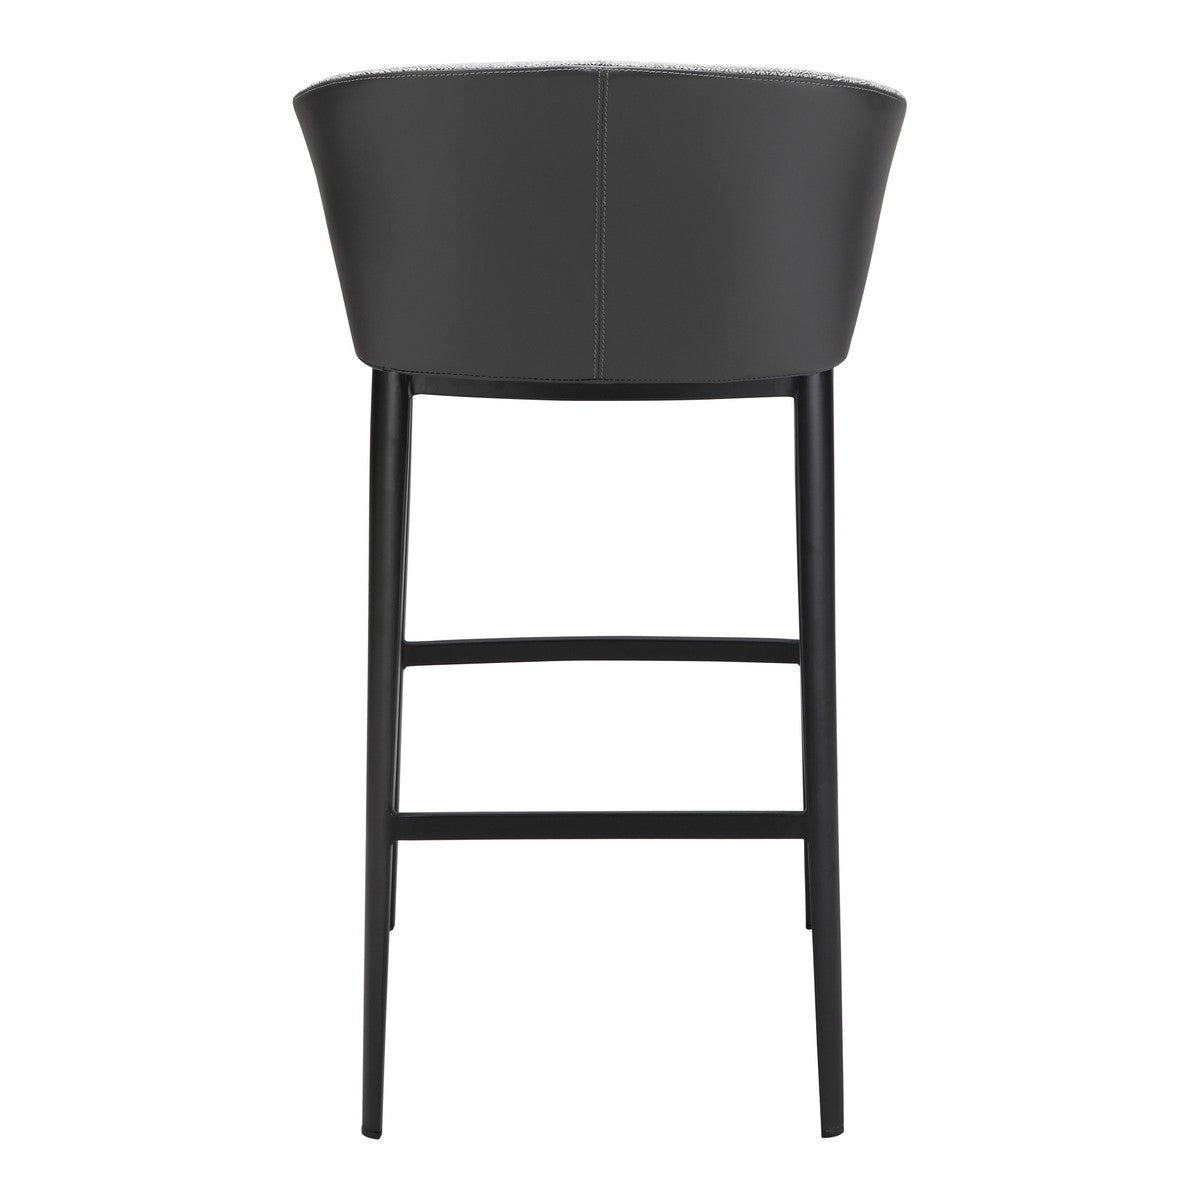 Moe's Home Collection Beckett Barstool Grey - EJ-1029-15